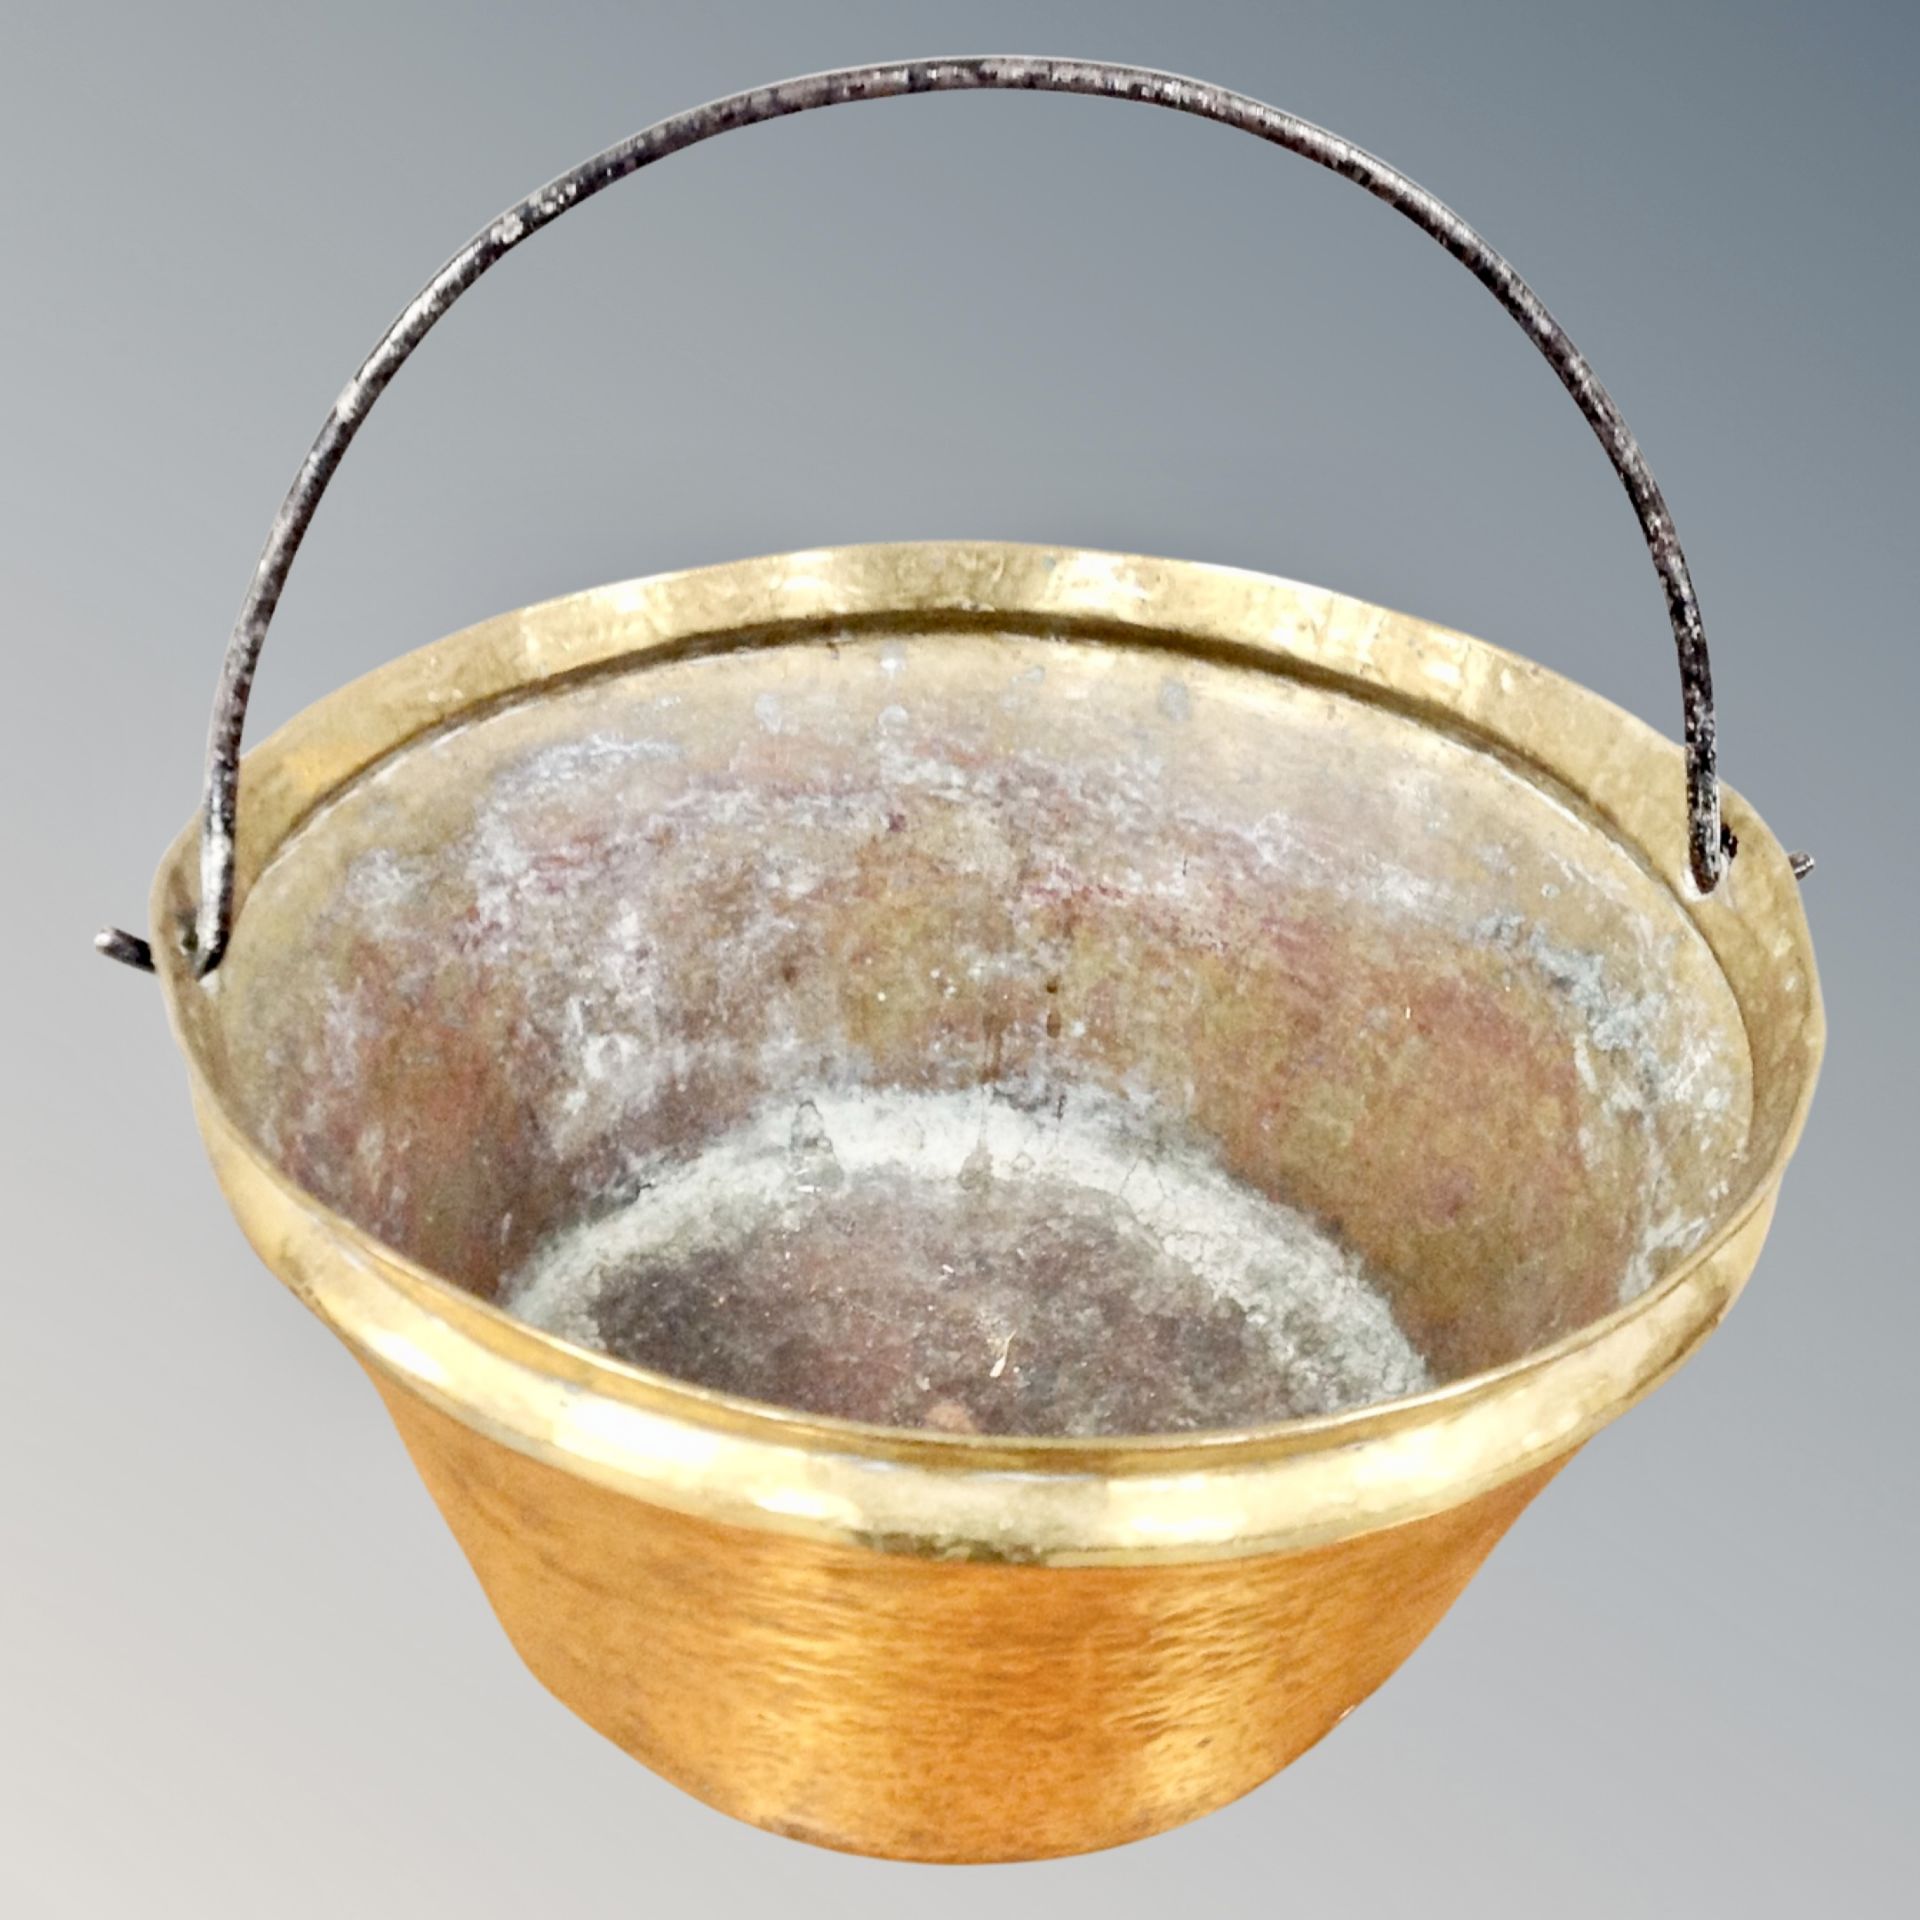 A 19th century hammered brass swing-handled cooking pot